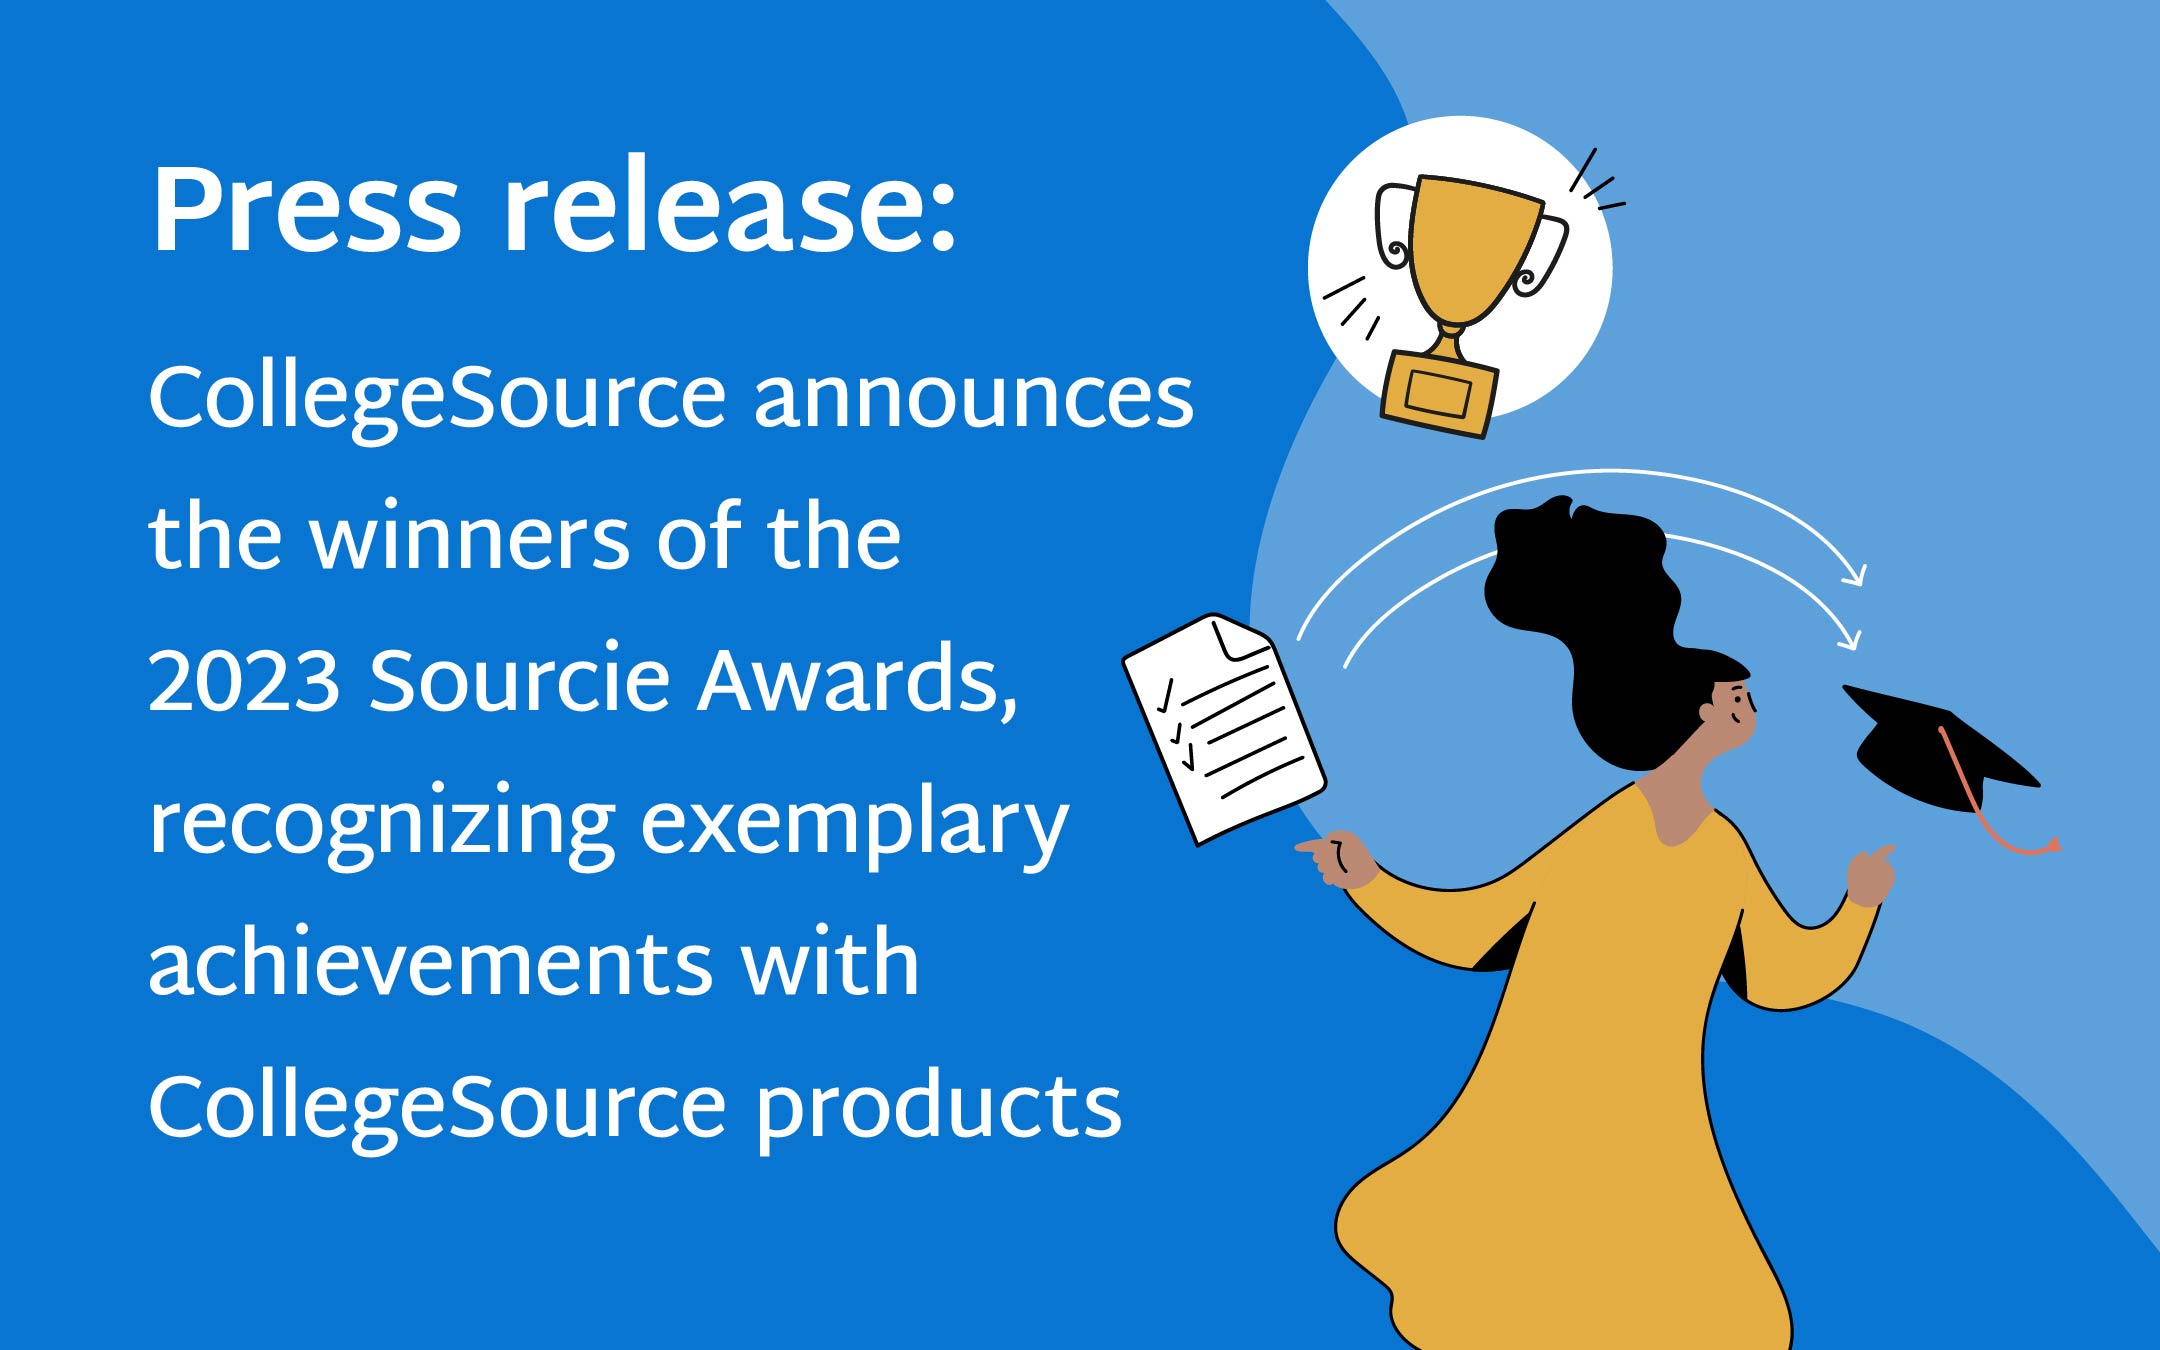 Press-release-CollegeSource-announces-winners-2023-Sourcie-Awards